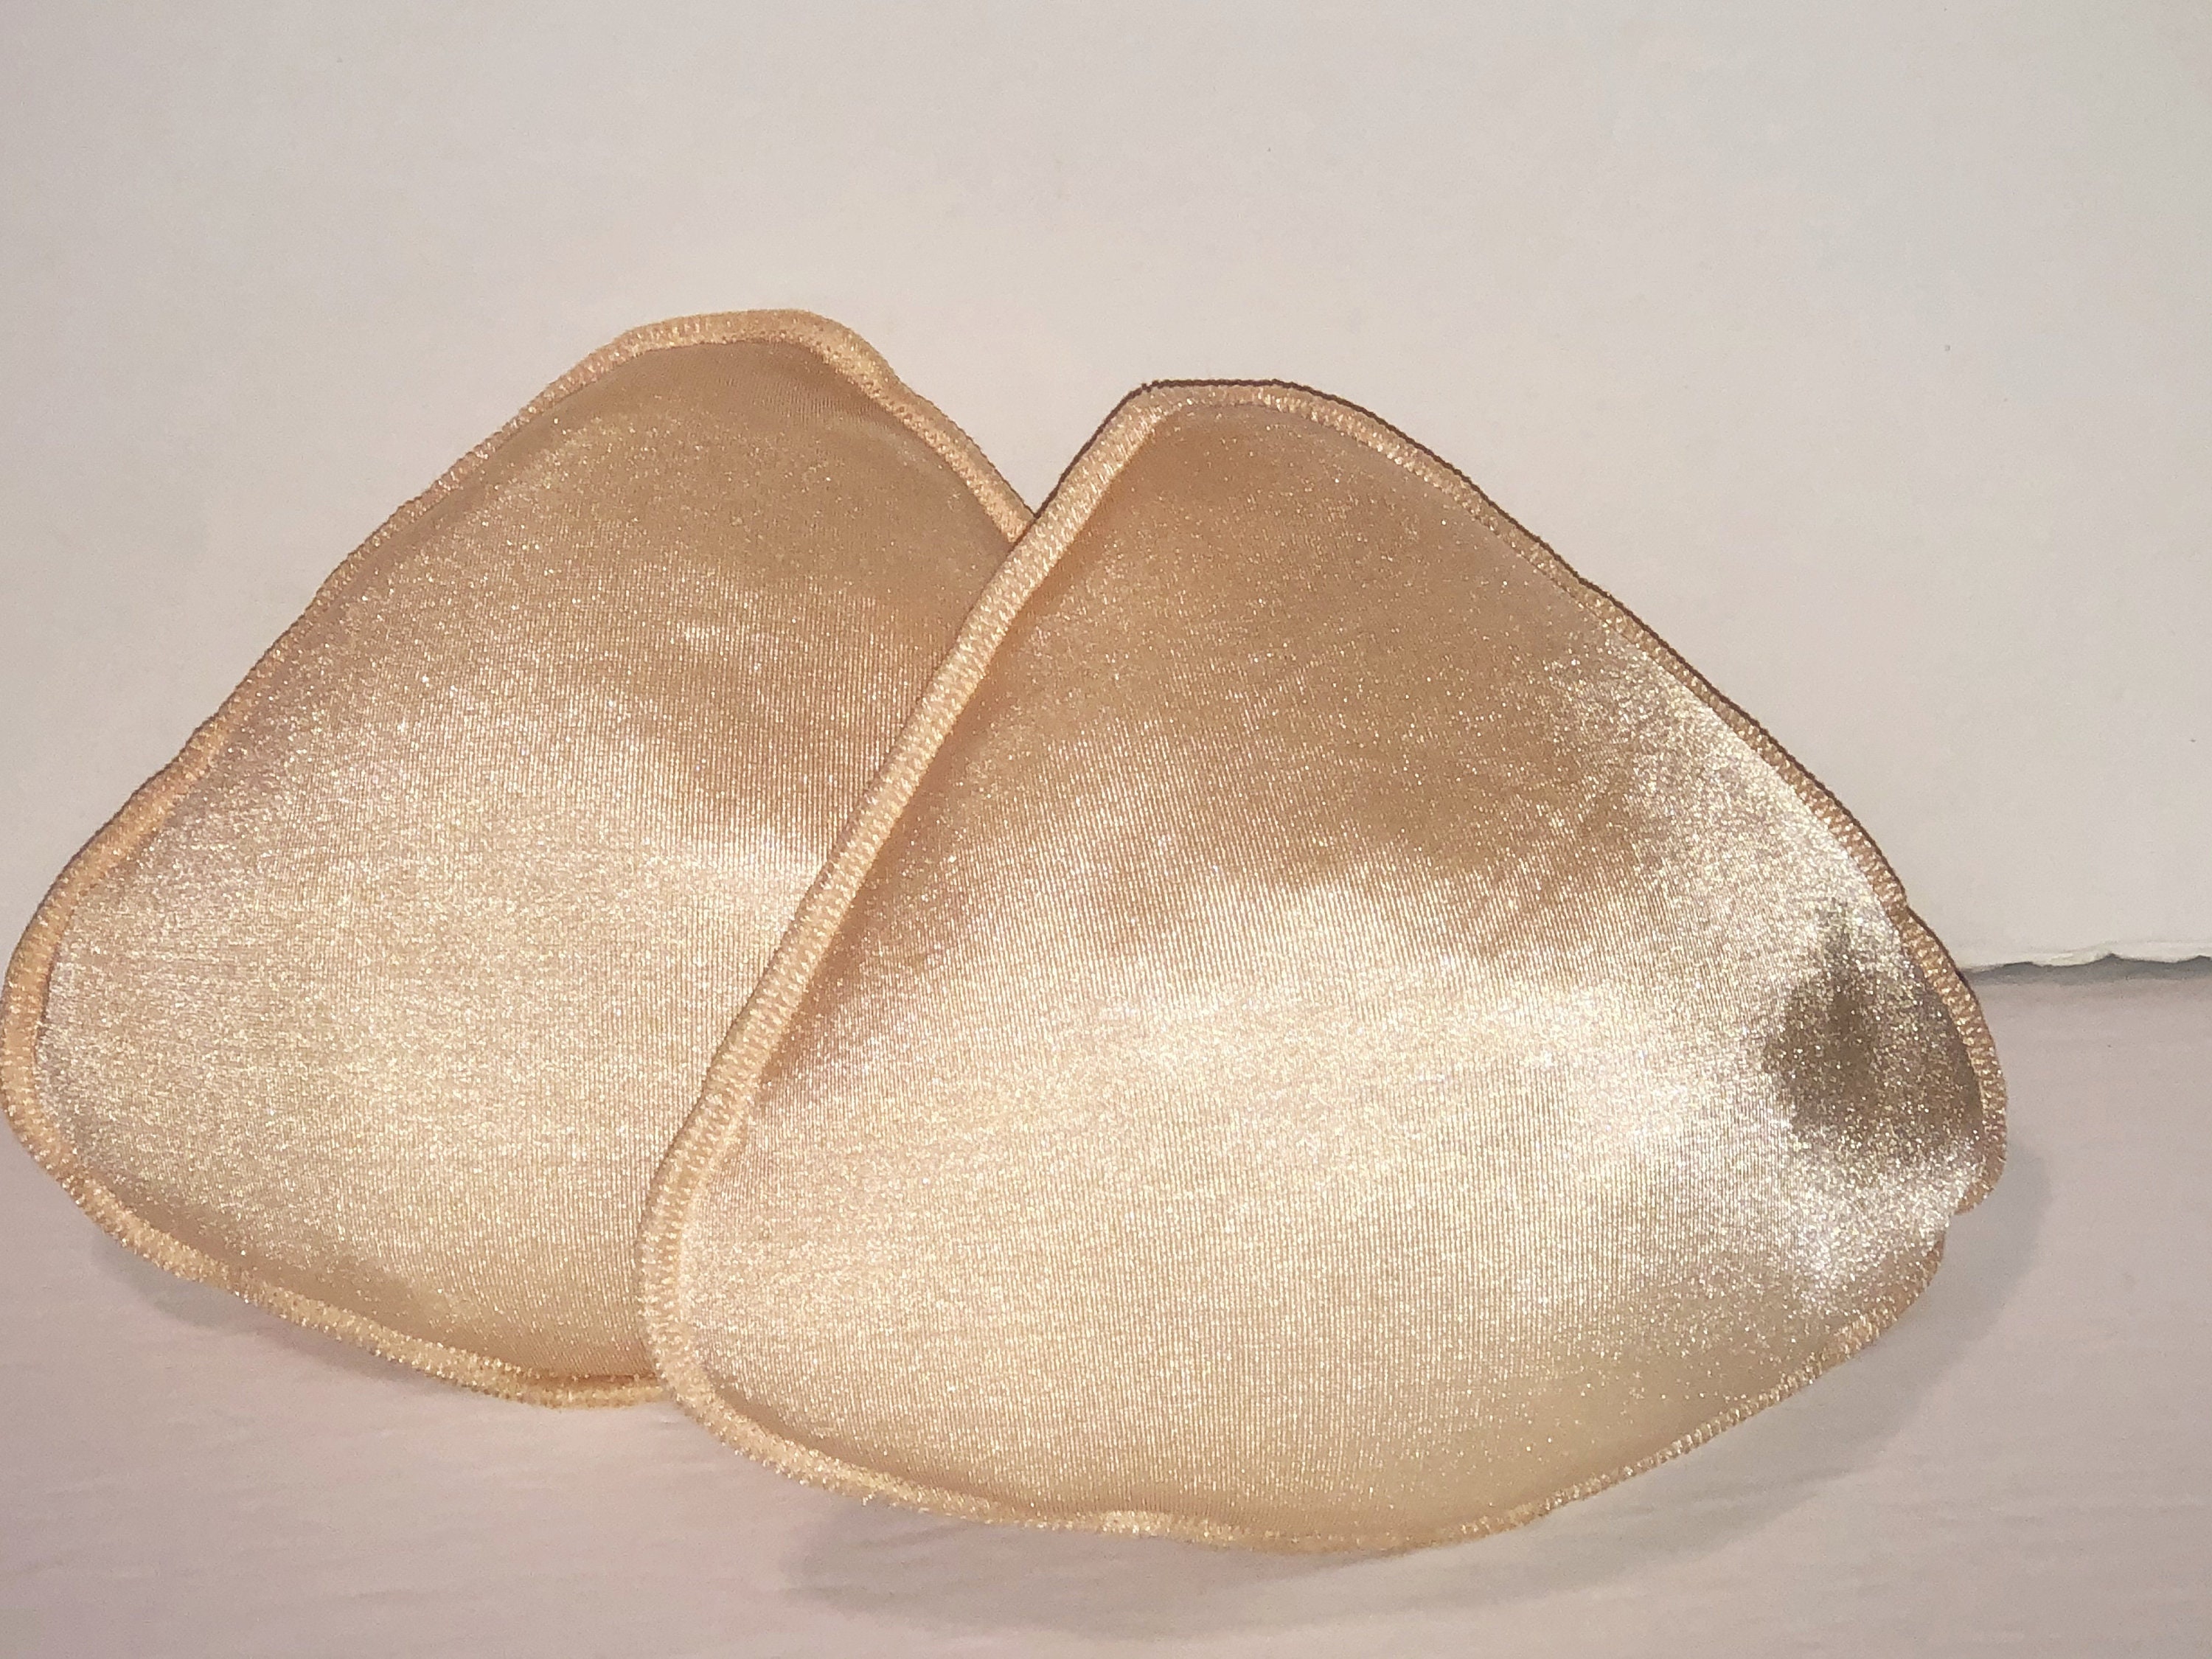 Nude Triangle Adjustable Prosthetic Mastectomy Breast Forms Pair 